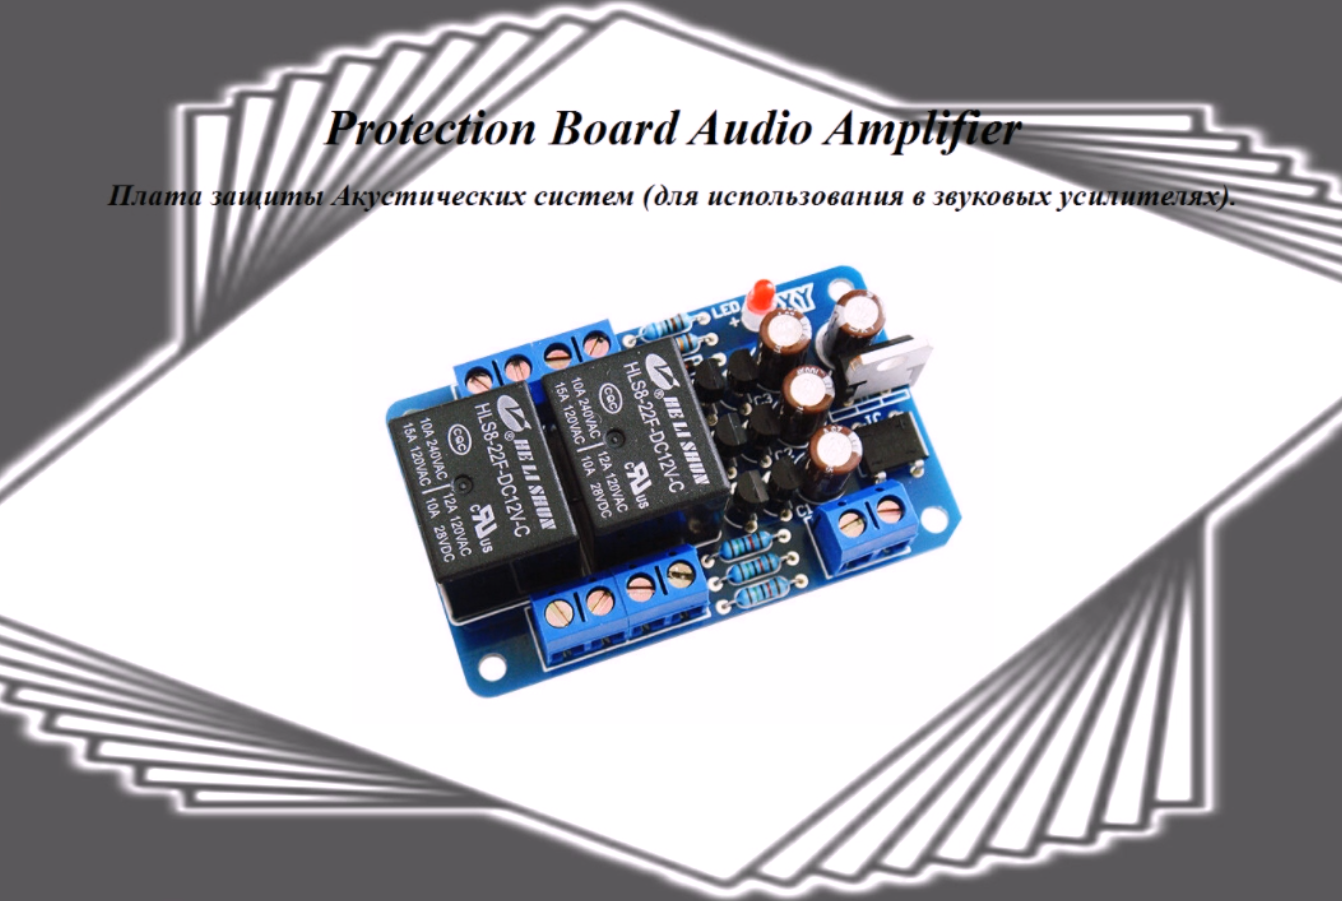 Protection Board Audio Amplifier